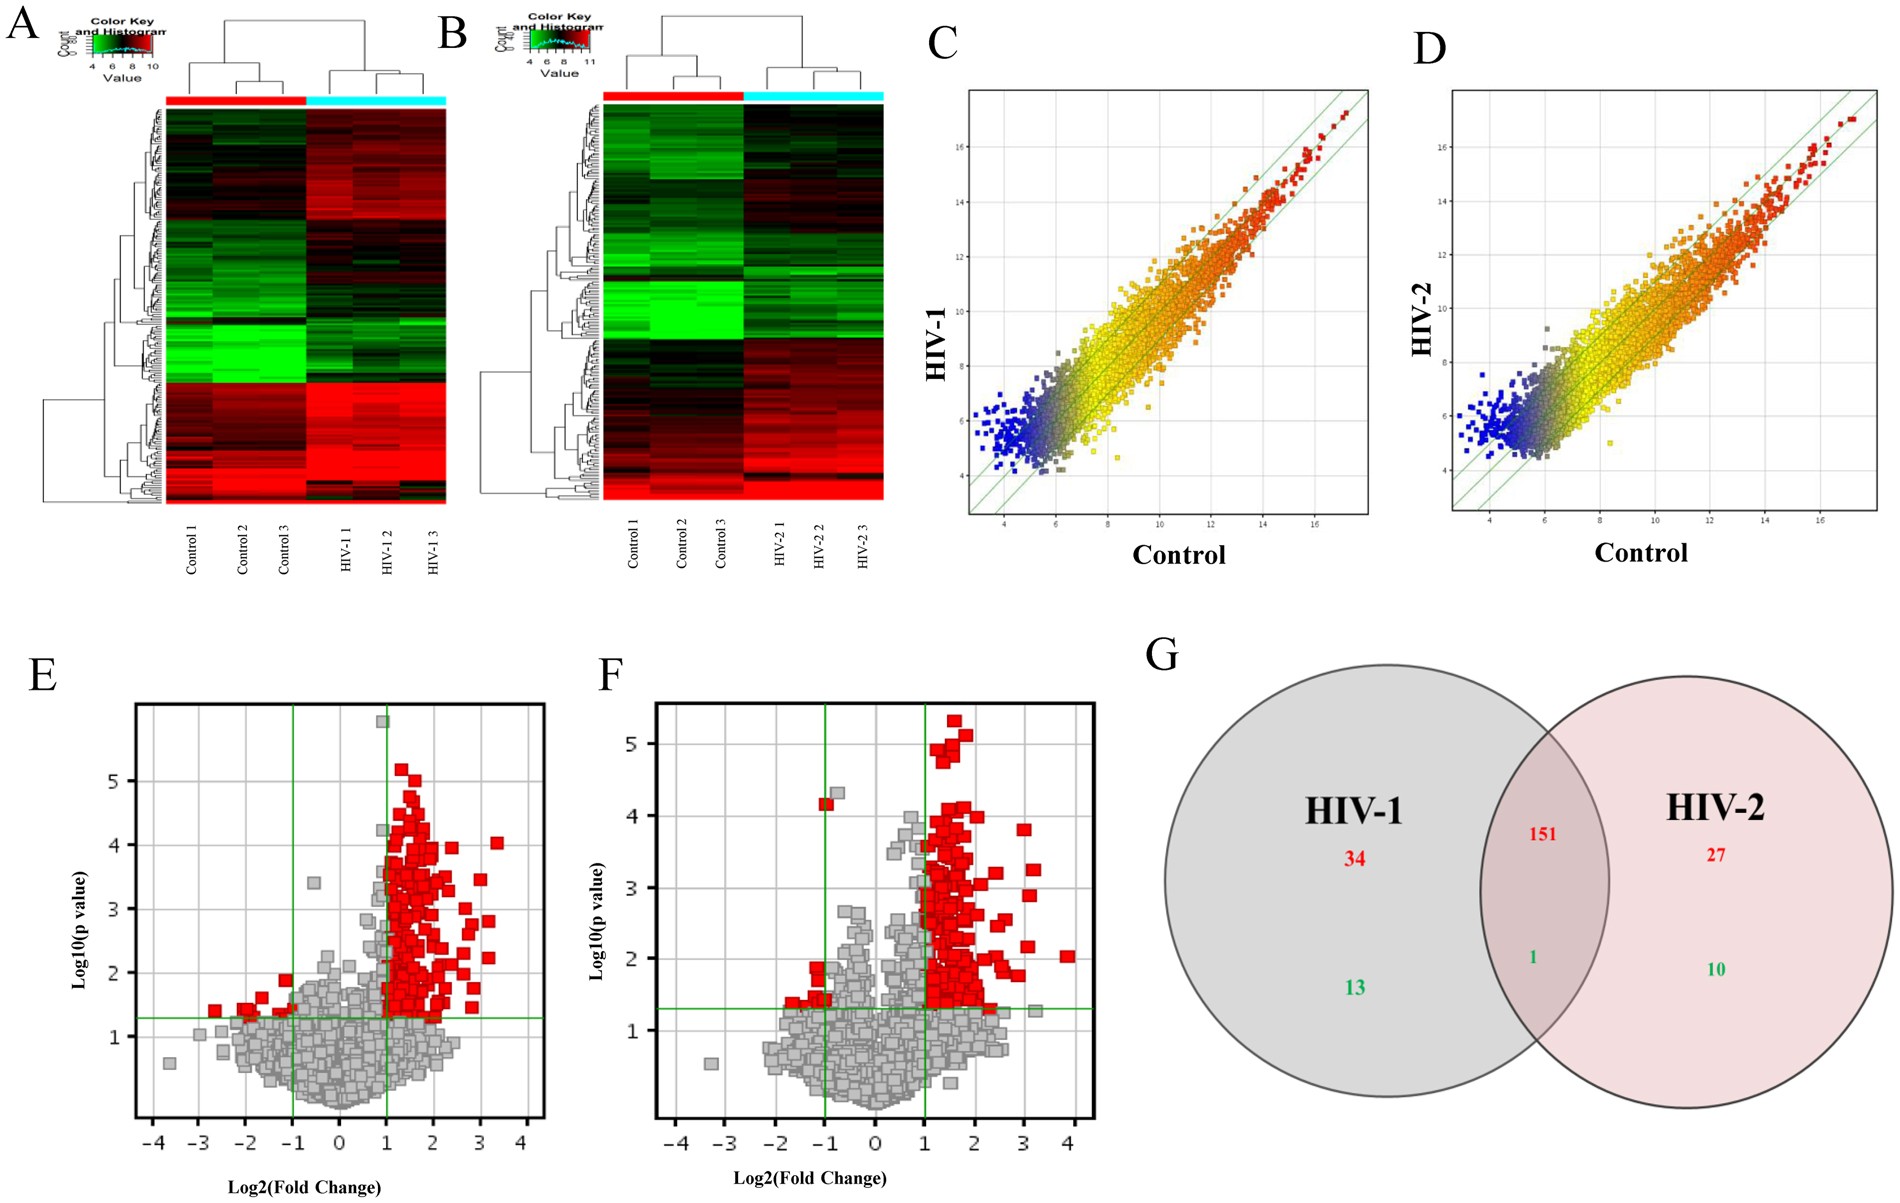 Differentially expressed host long intergenic noncoding RNA and mRNA in  HIV-1 and HIV-2 infection | Scientific Reports